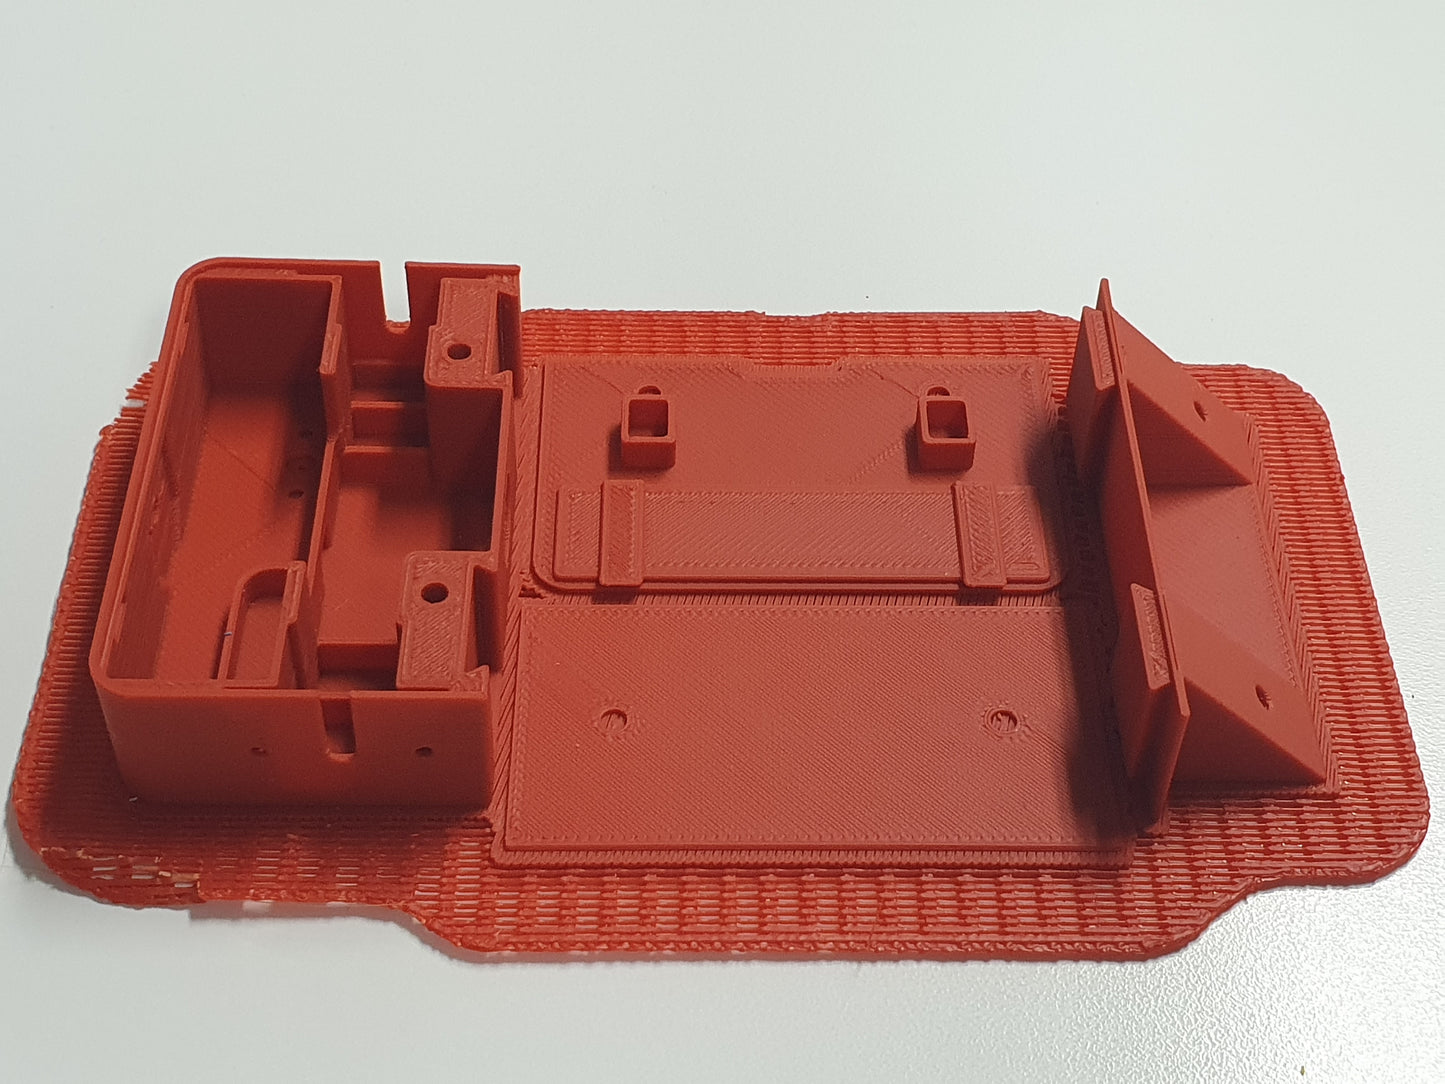 CRNZ Ant Weight Core Kit Chassis (Printed ABS+)